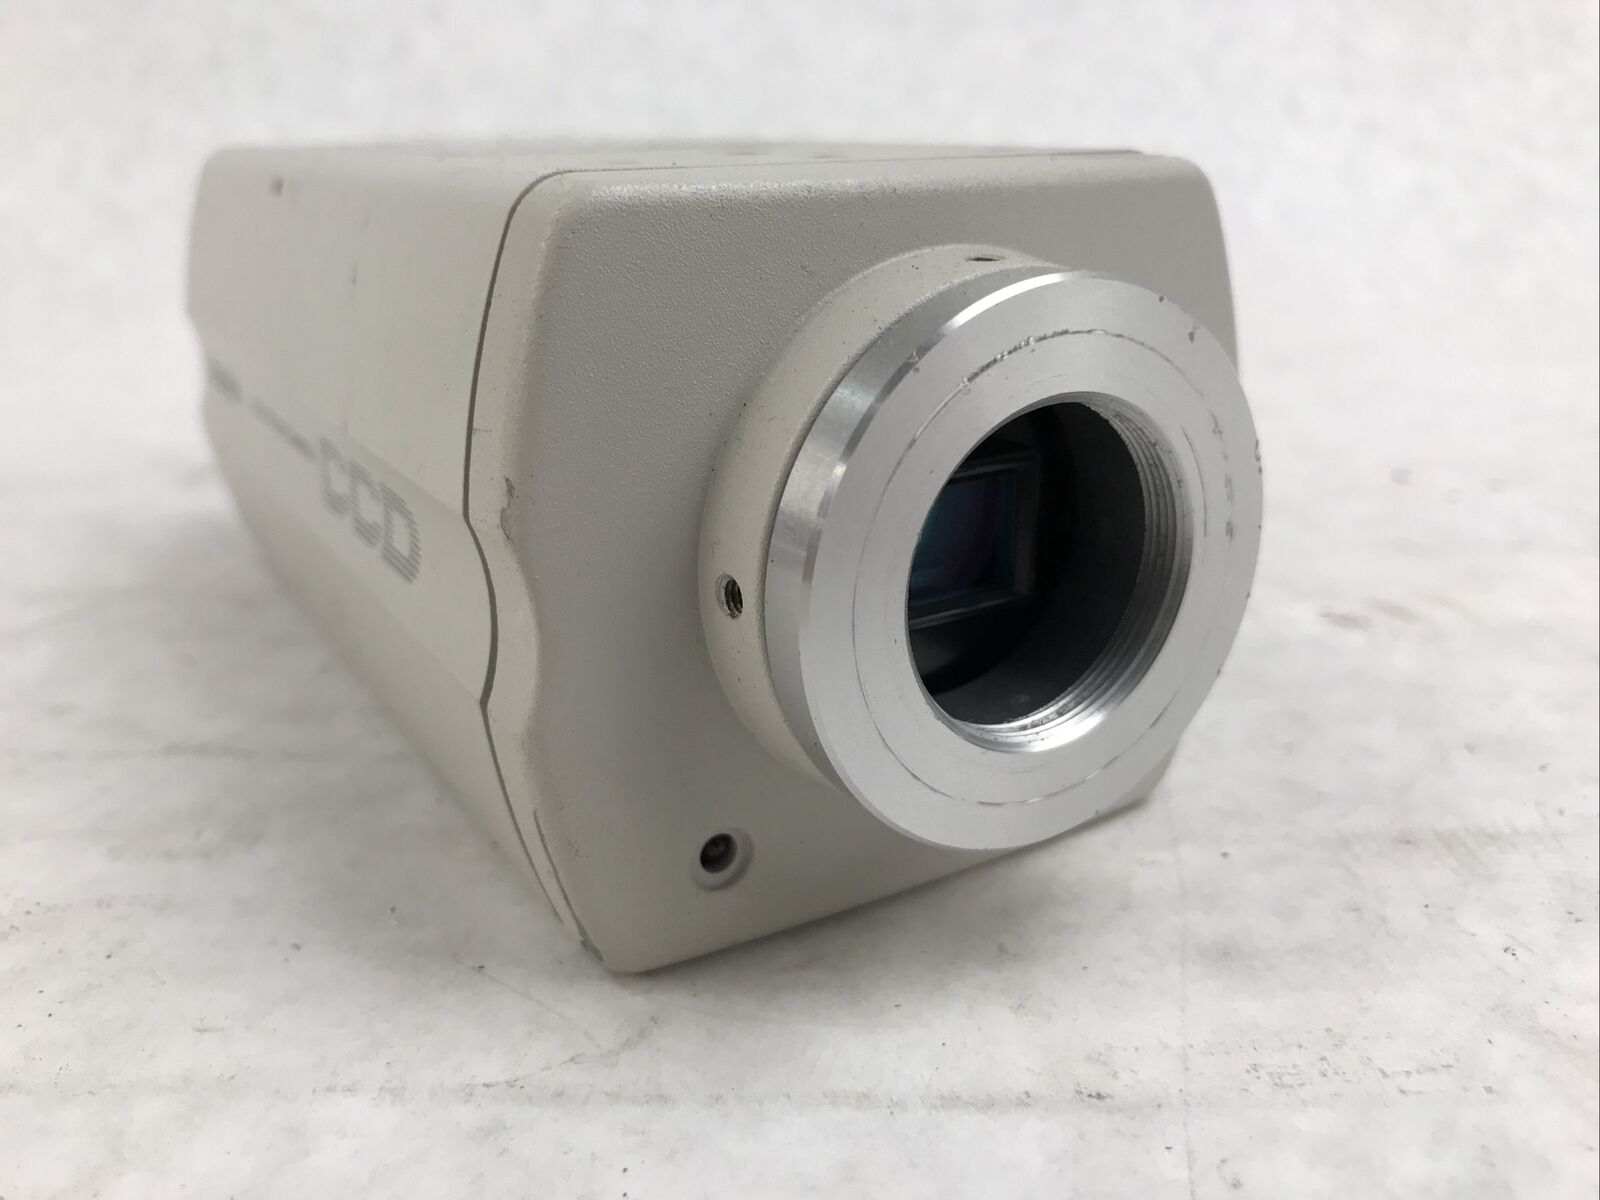 Toshiba CCD Color Camera IK-642AT - UNTESTED